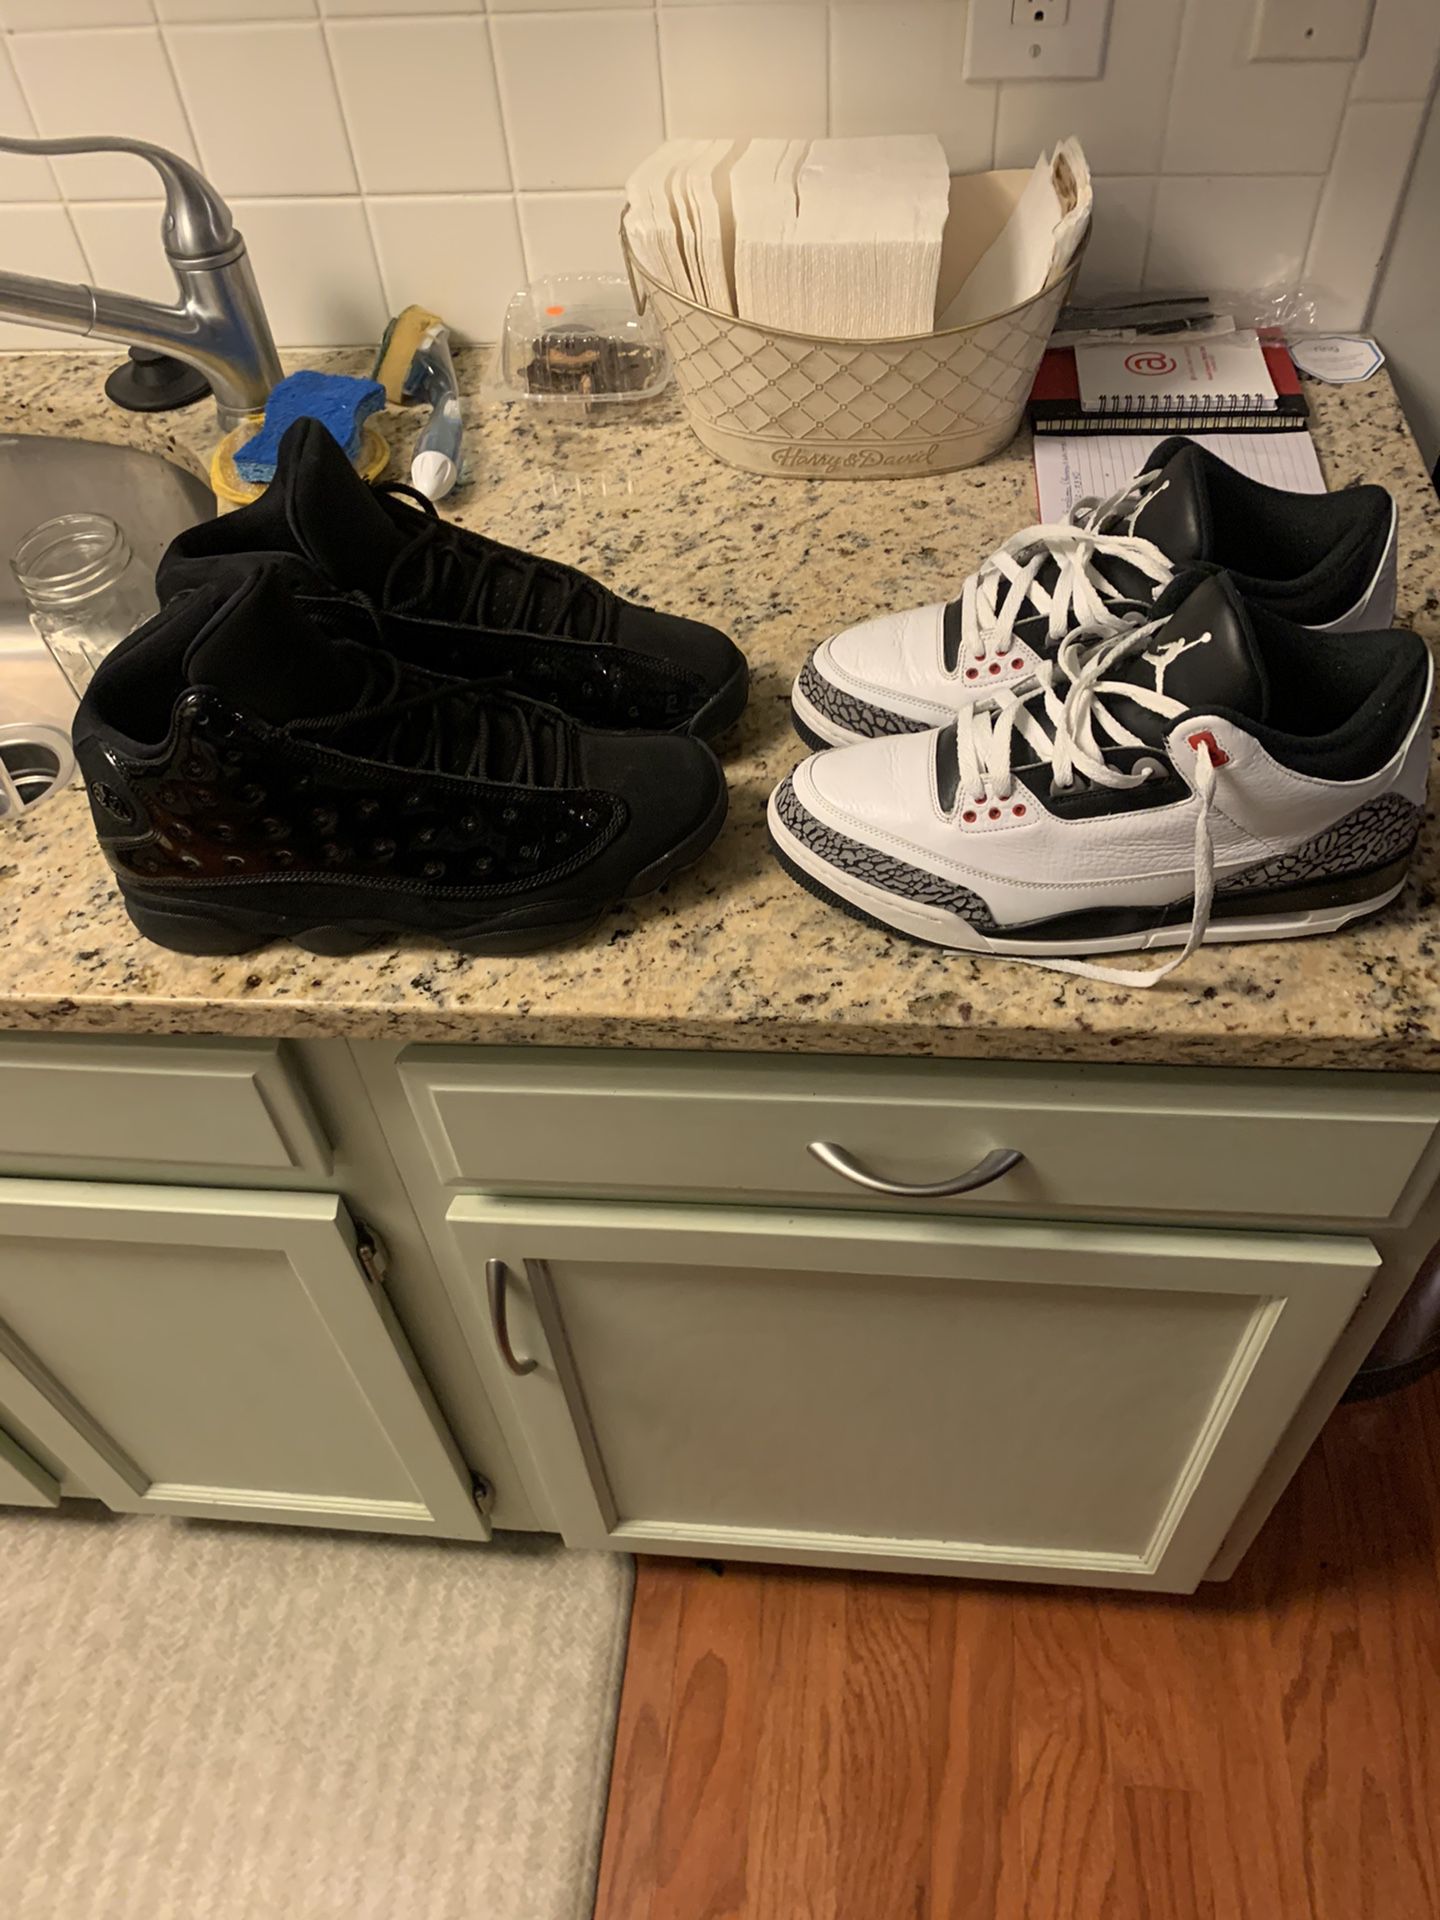 Jordan Cap and Gown 11 and Infrared 3s